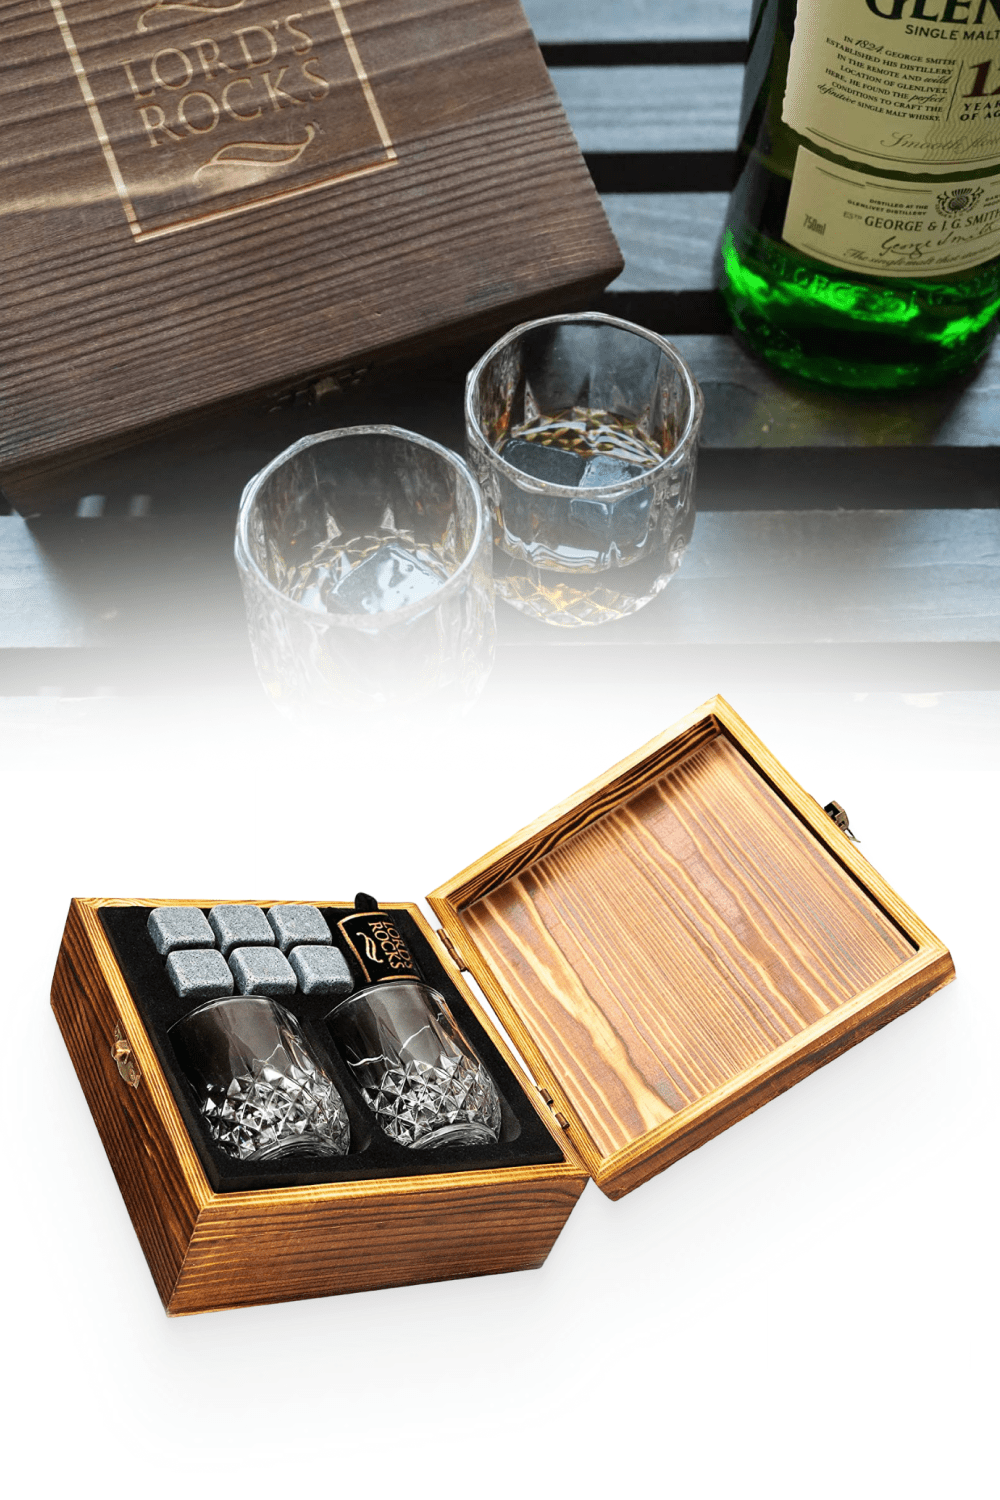 6 Whiskey Stones in wooden box.